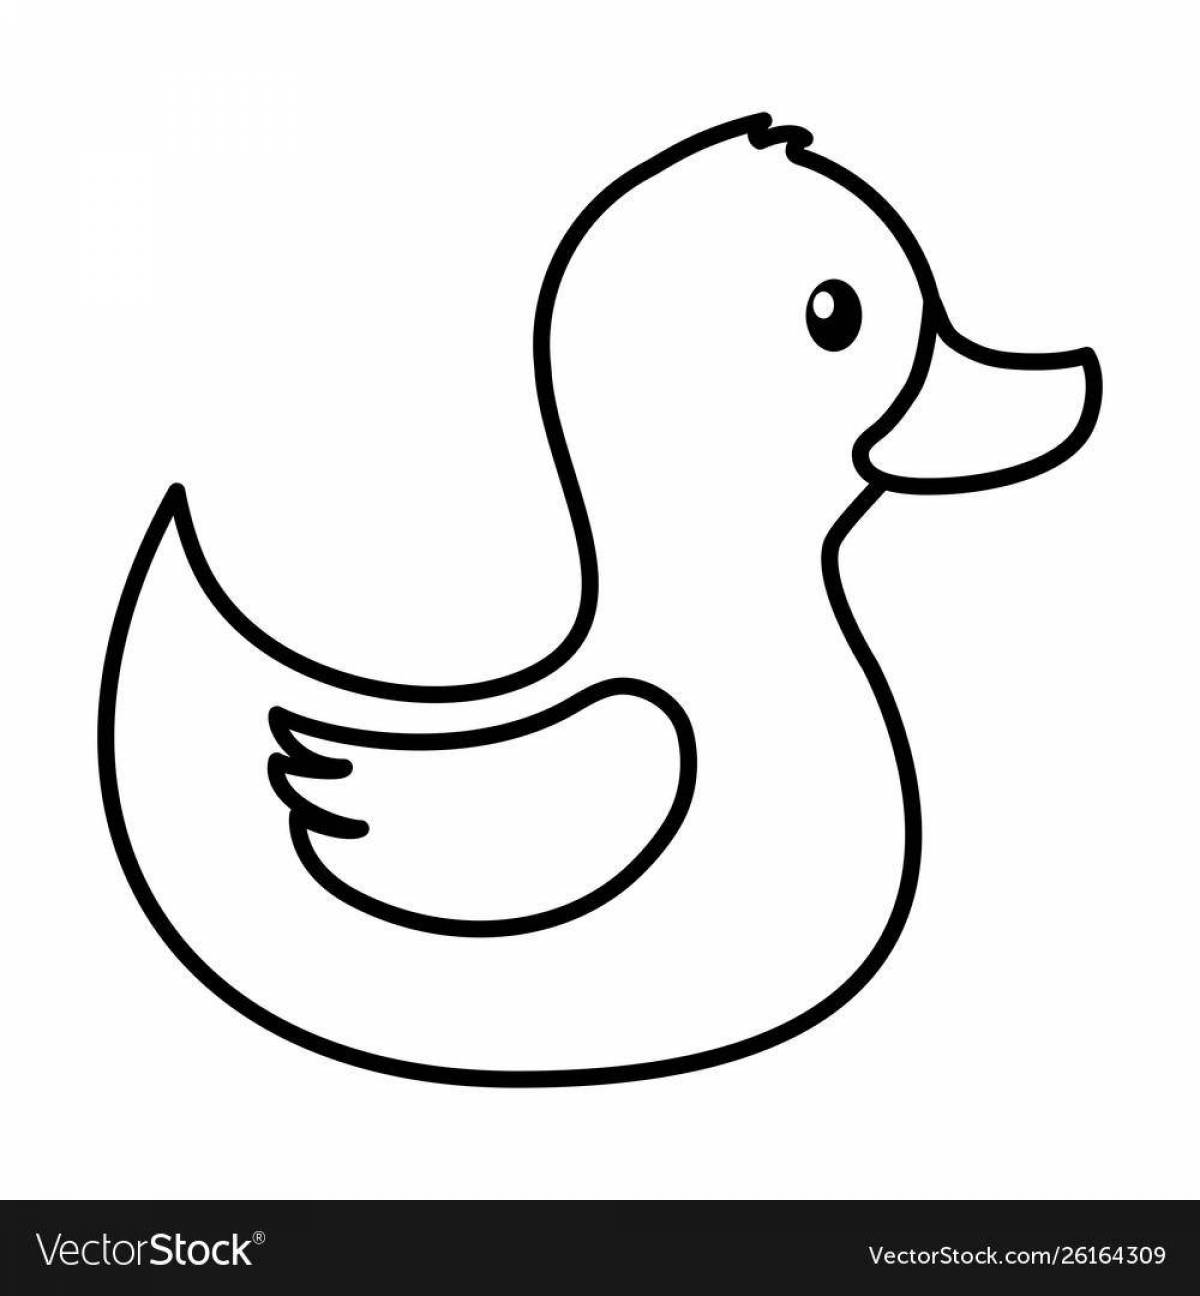 Cute paper duck coloring page